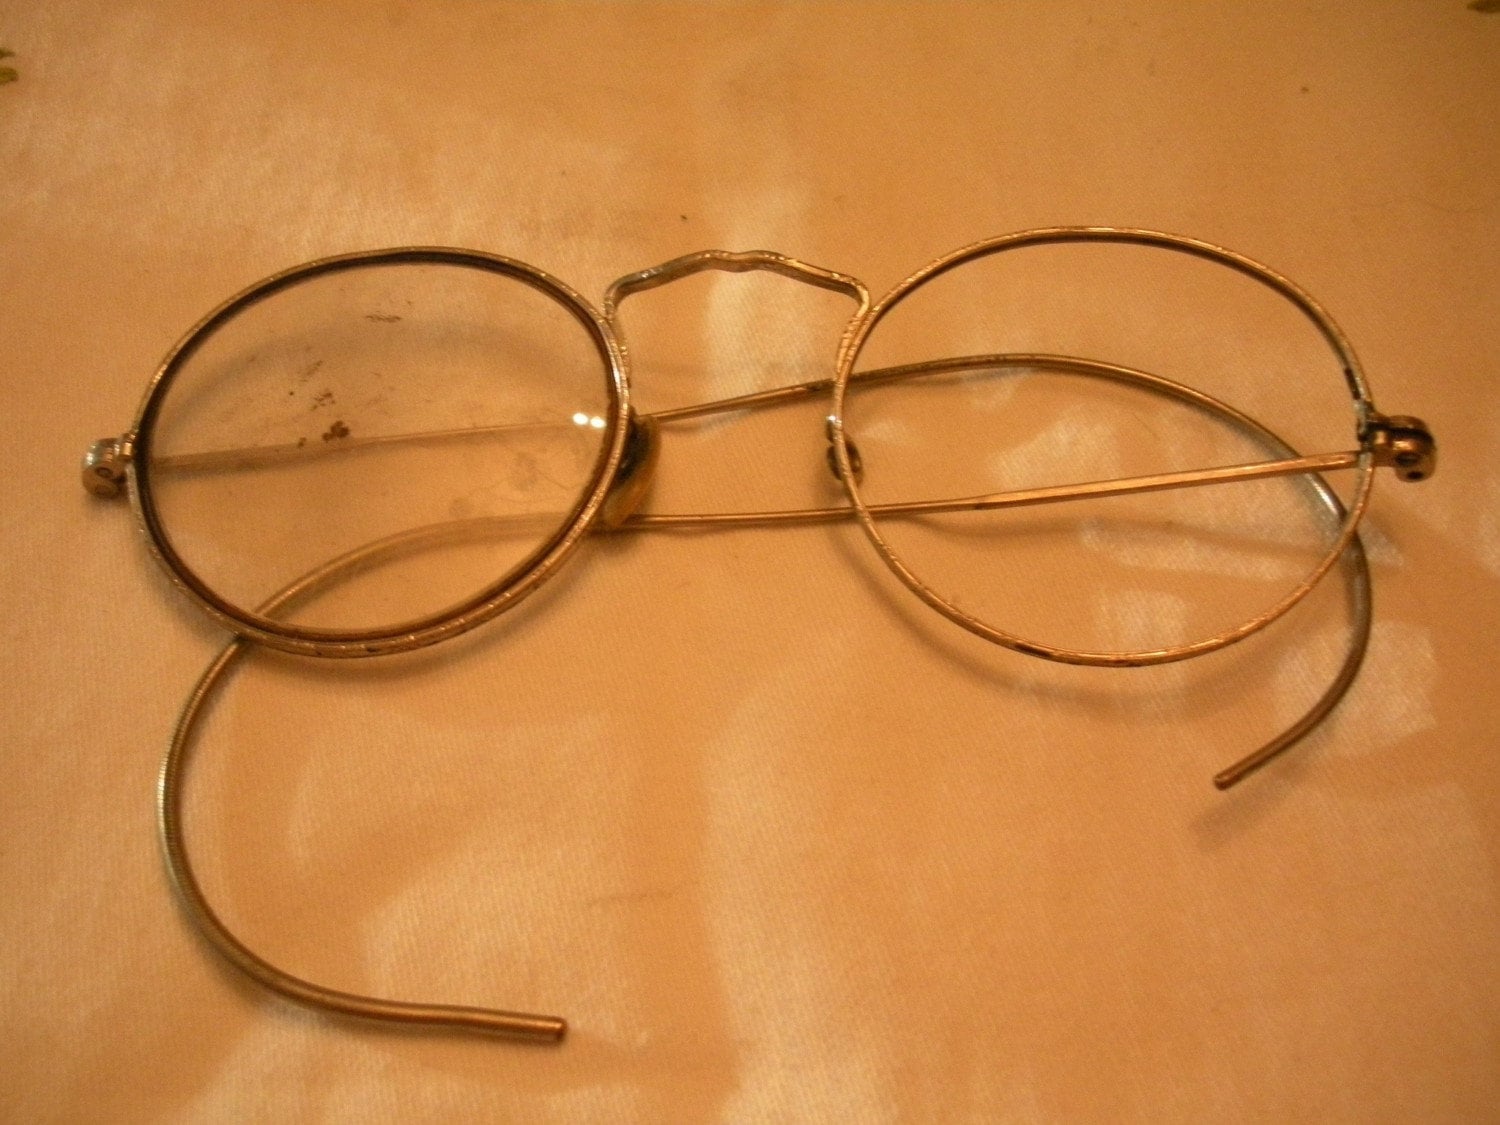 Old Spectacles 113